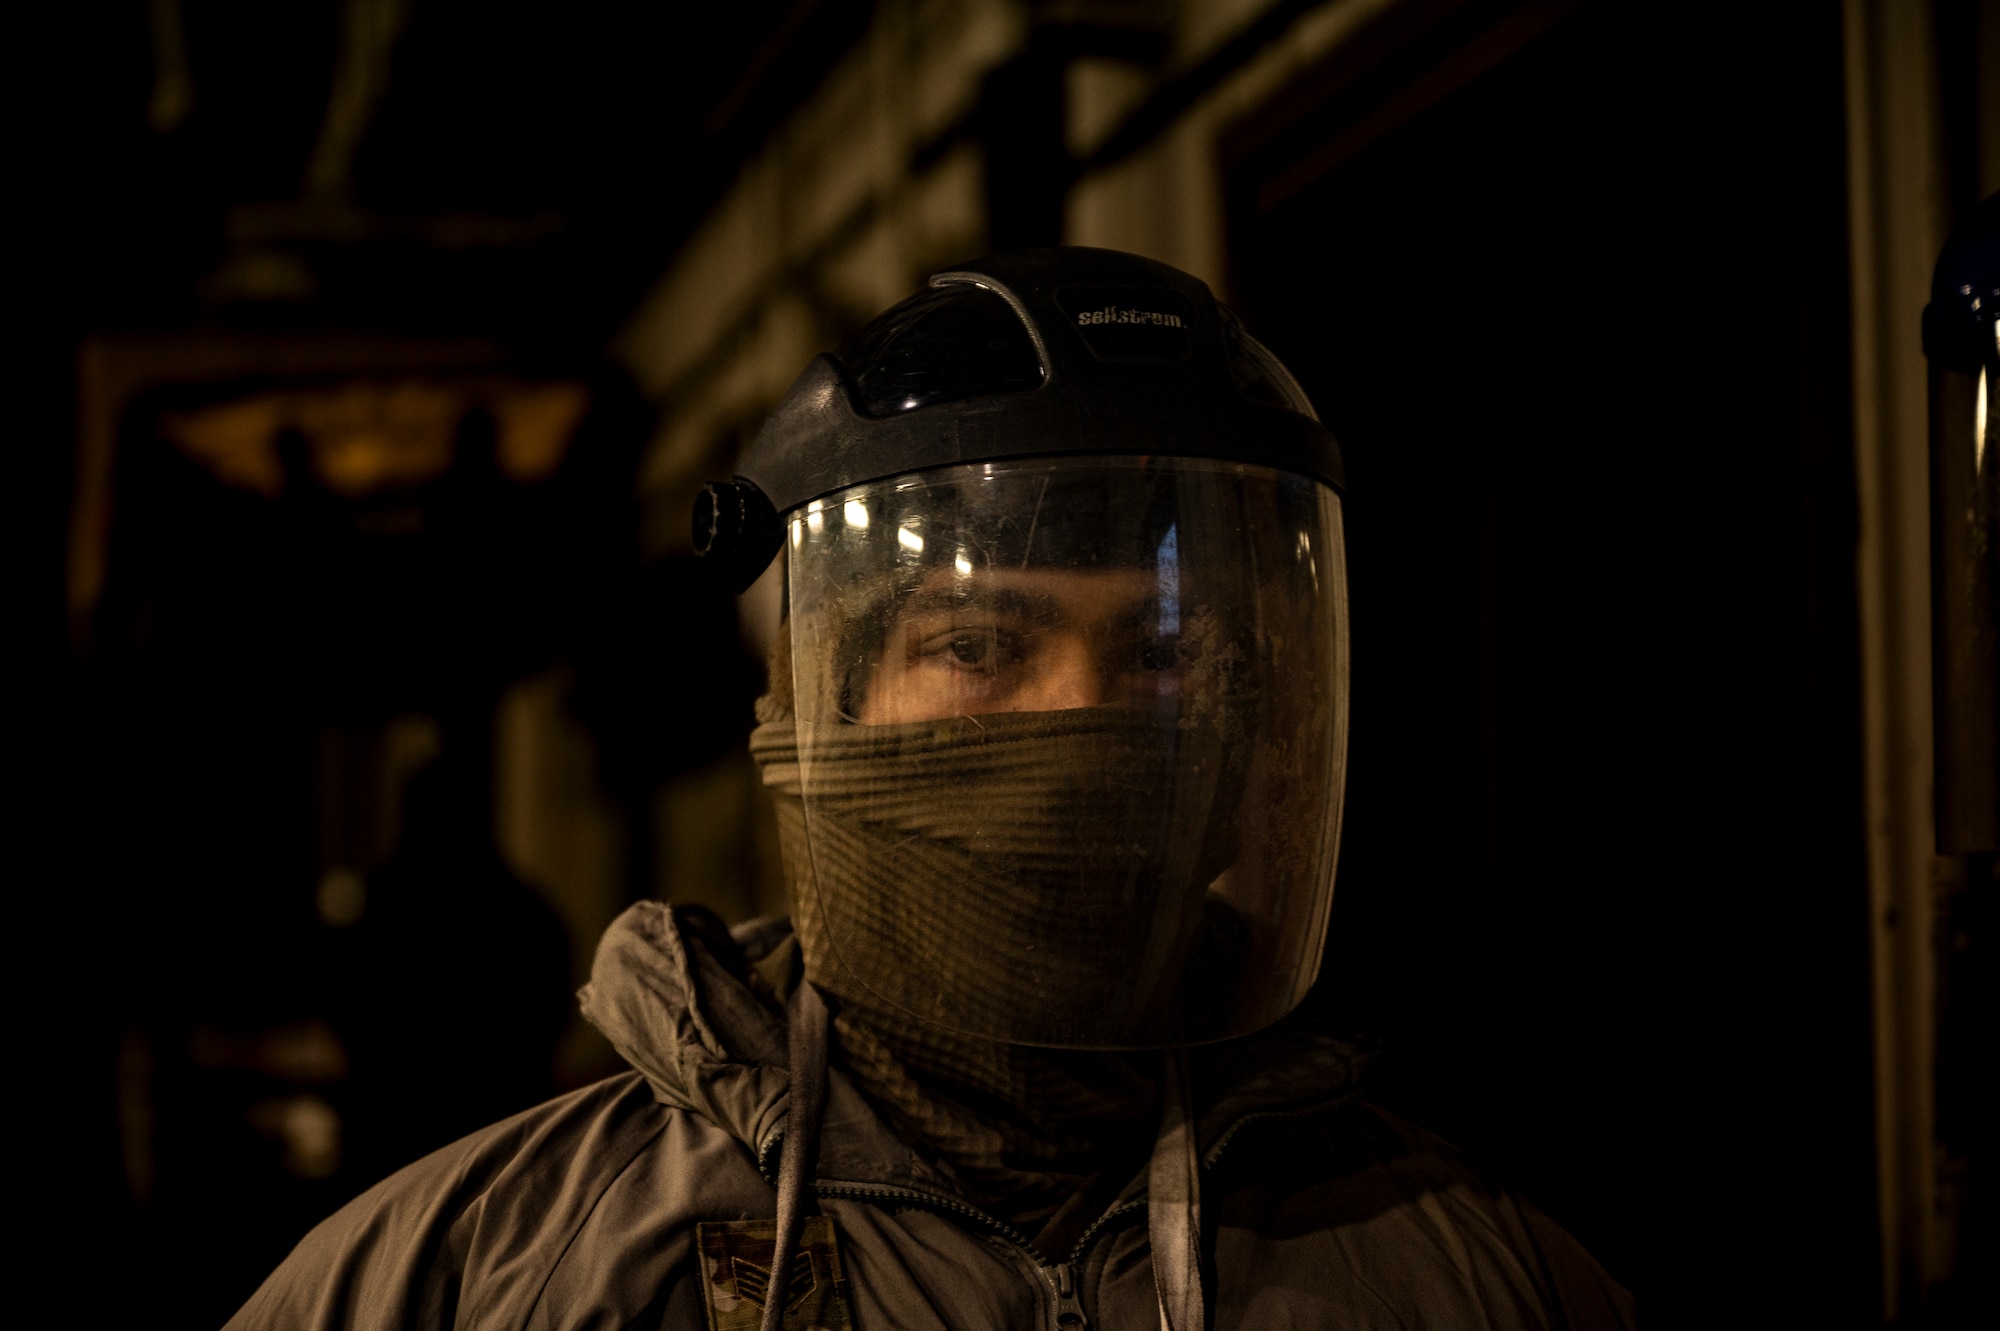 U.S. Air Force Staff Sgt. Zachary Smith, 51st Logistics Readiness Squadron fuels distribution supervisor dons protective gear before performing morning checkpoint inspections at Osan Air Base, Republic of Korea, Dec. 1, 2022.